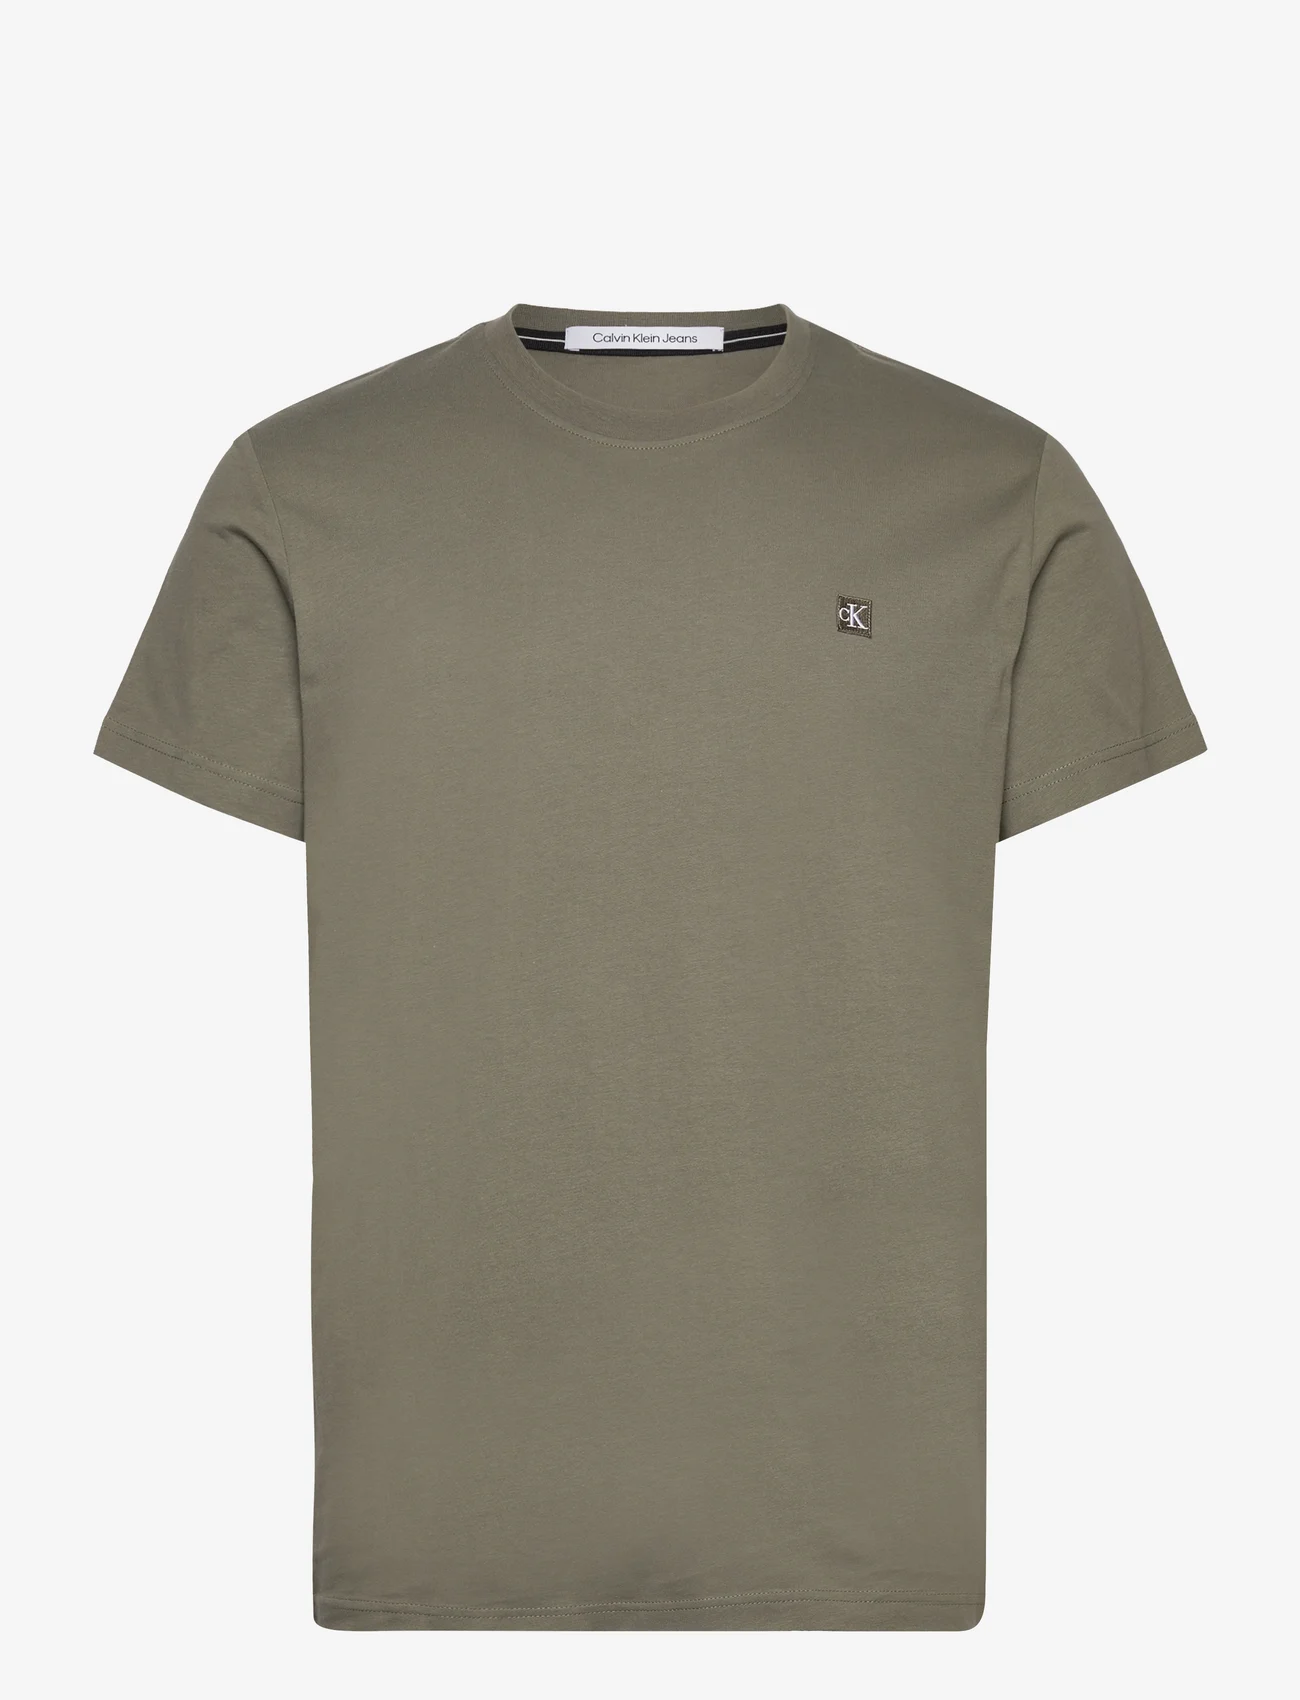 Calvin Klein Jeans - CK EMBRO BADGE TEE - lowest prices - dusty olive - 0